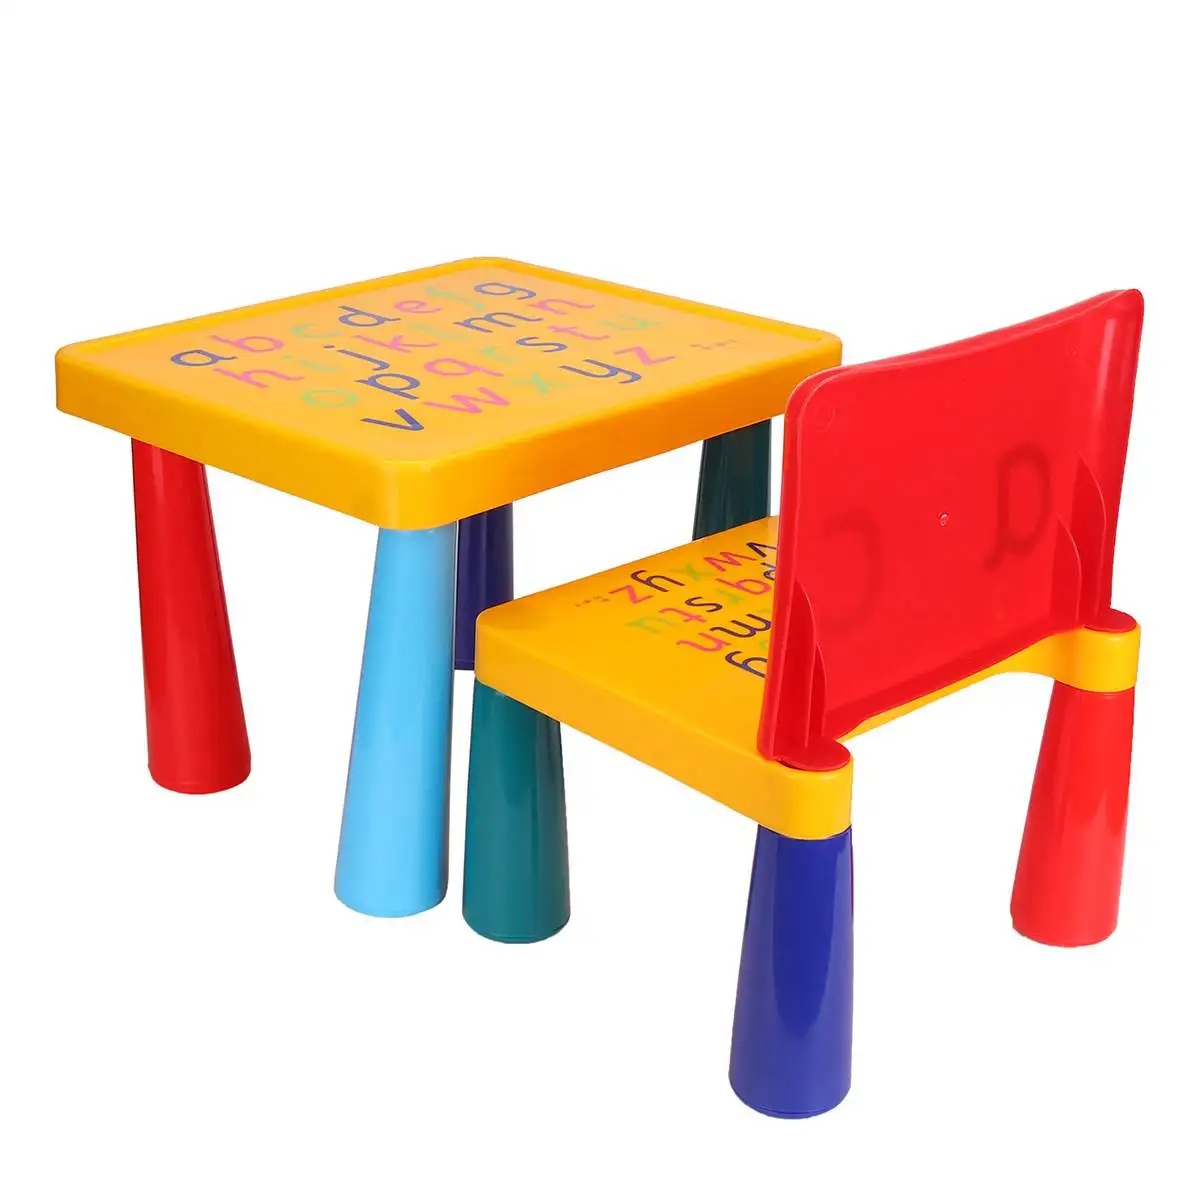 Children Chair Table Set Plastic Kids Play Study Desk Colorful Activity Writing Student Furniture Folding Children Furniture Set